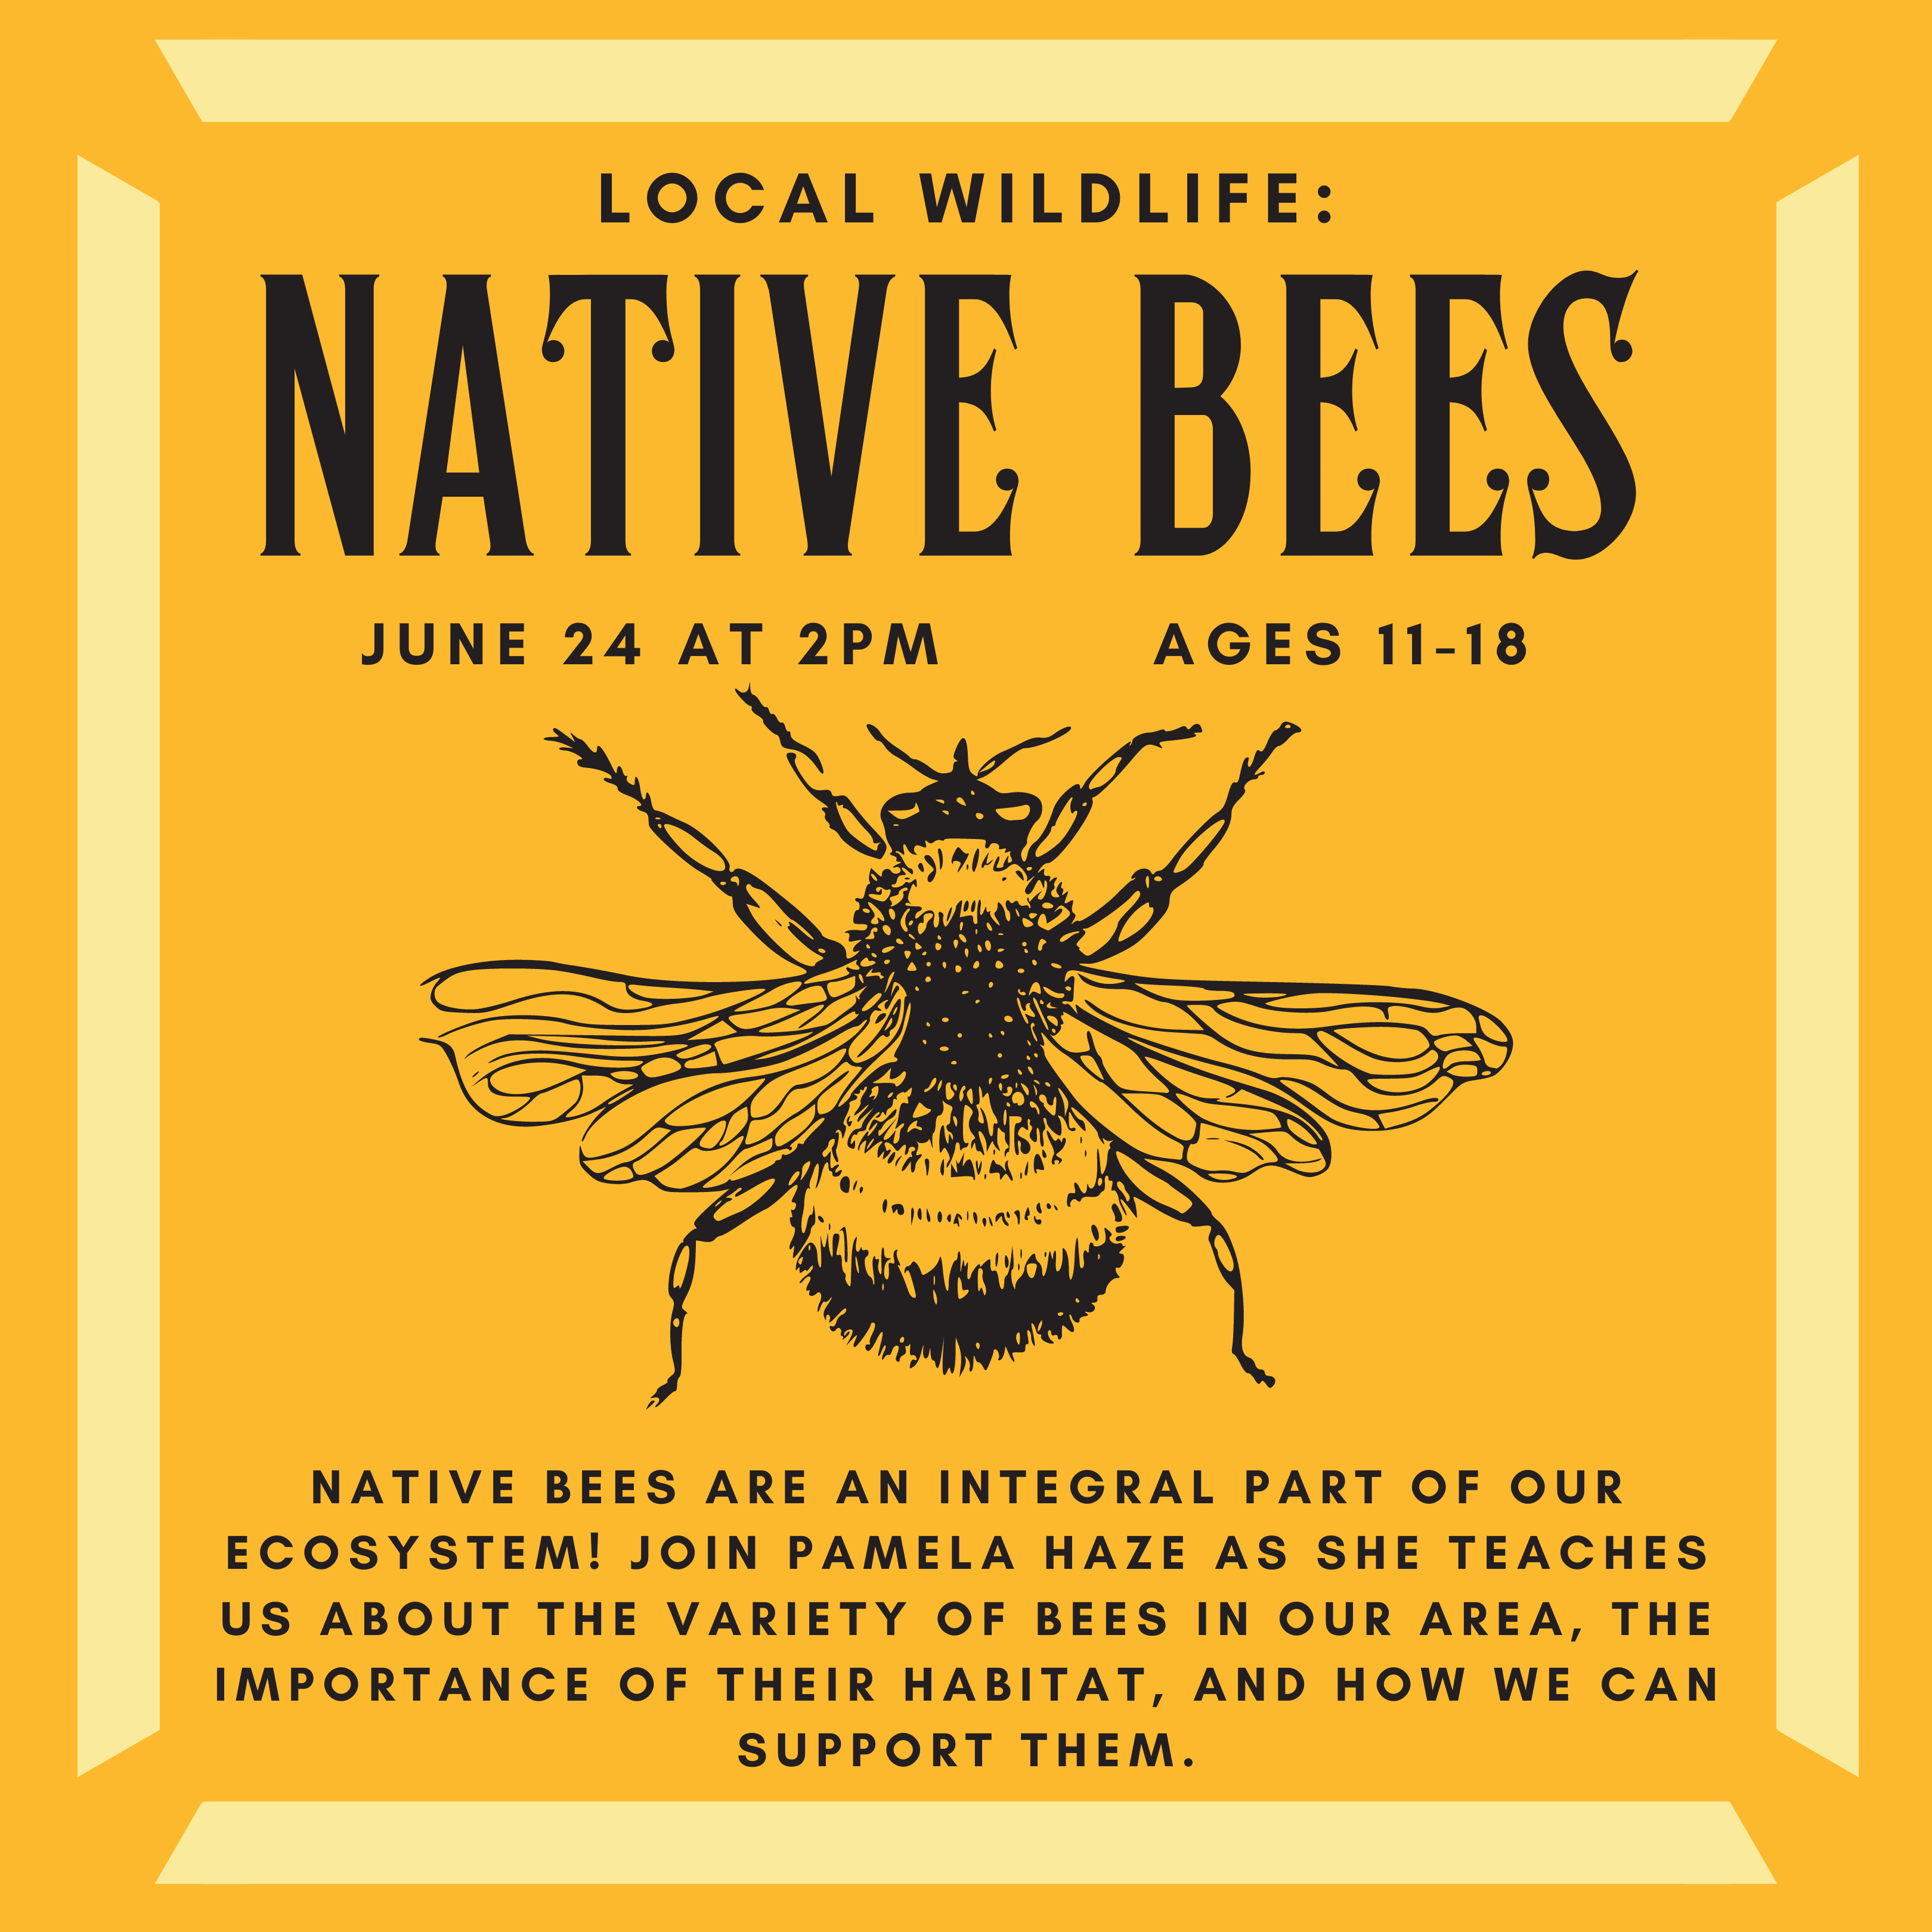 A yellow background with the image of a bee and text that reads: Local Wildlife: Native Bees! June 24th at 2pm. Ages 11-18. Native bees are an integral part of our ecosystem! Join Pamela Haze as she teaches us about the variety of bees in our area, the importance of their habitat, and how we can support them.